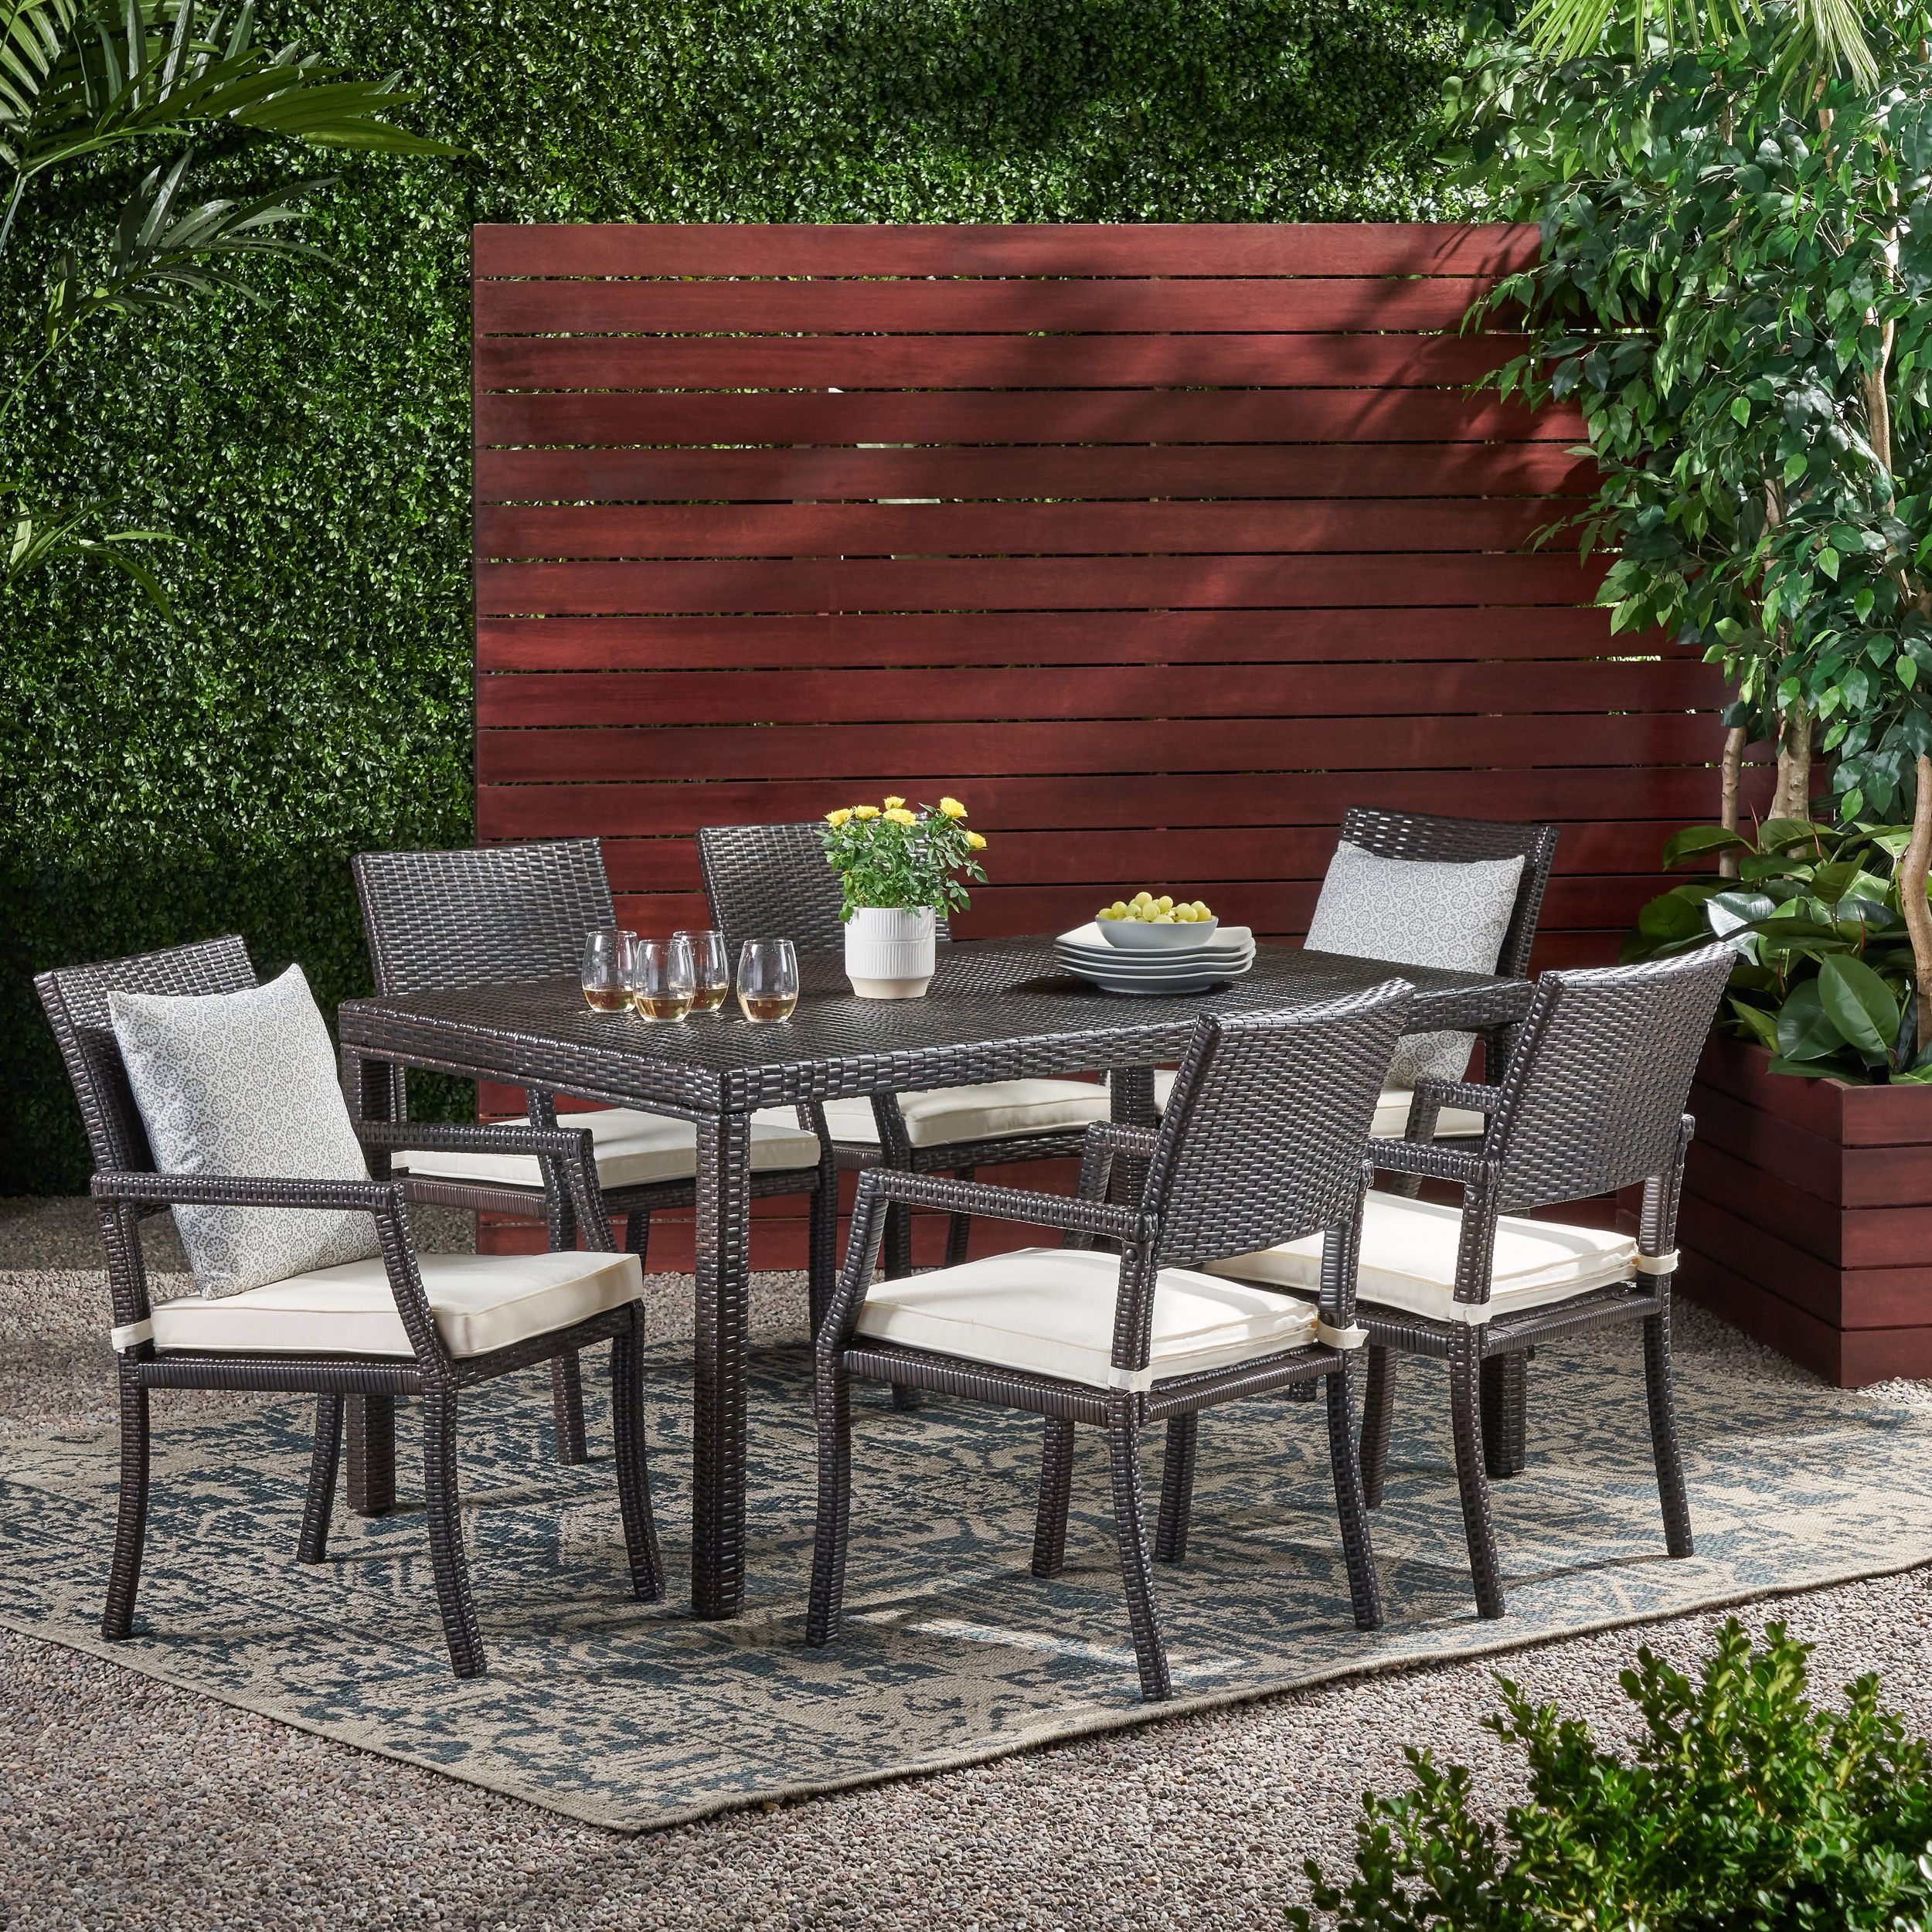 7 Piece Rectangular Patio Dining Sets In Well Known Outdoor 7 Piece Wicker Rectangular Dining Set,multibrown,white (View 1 of 15)